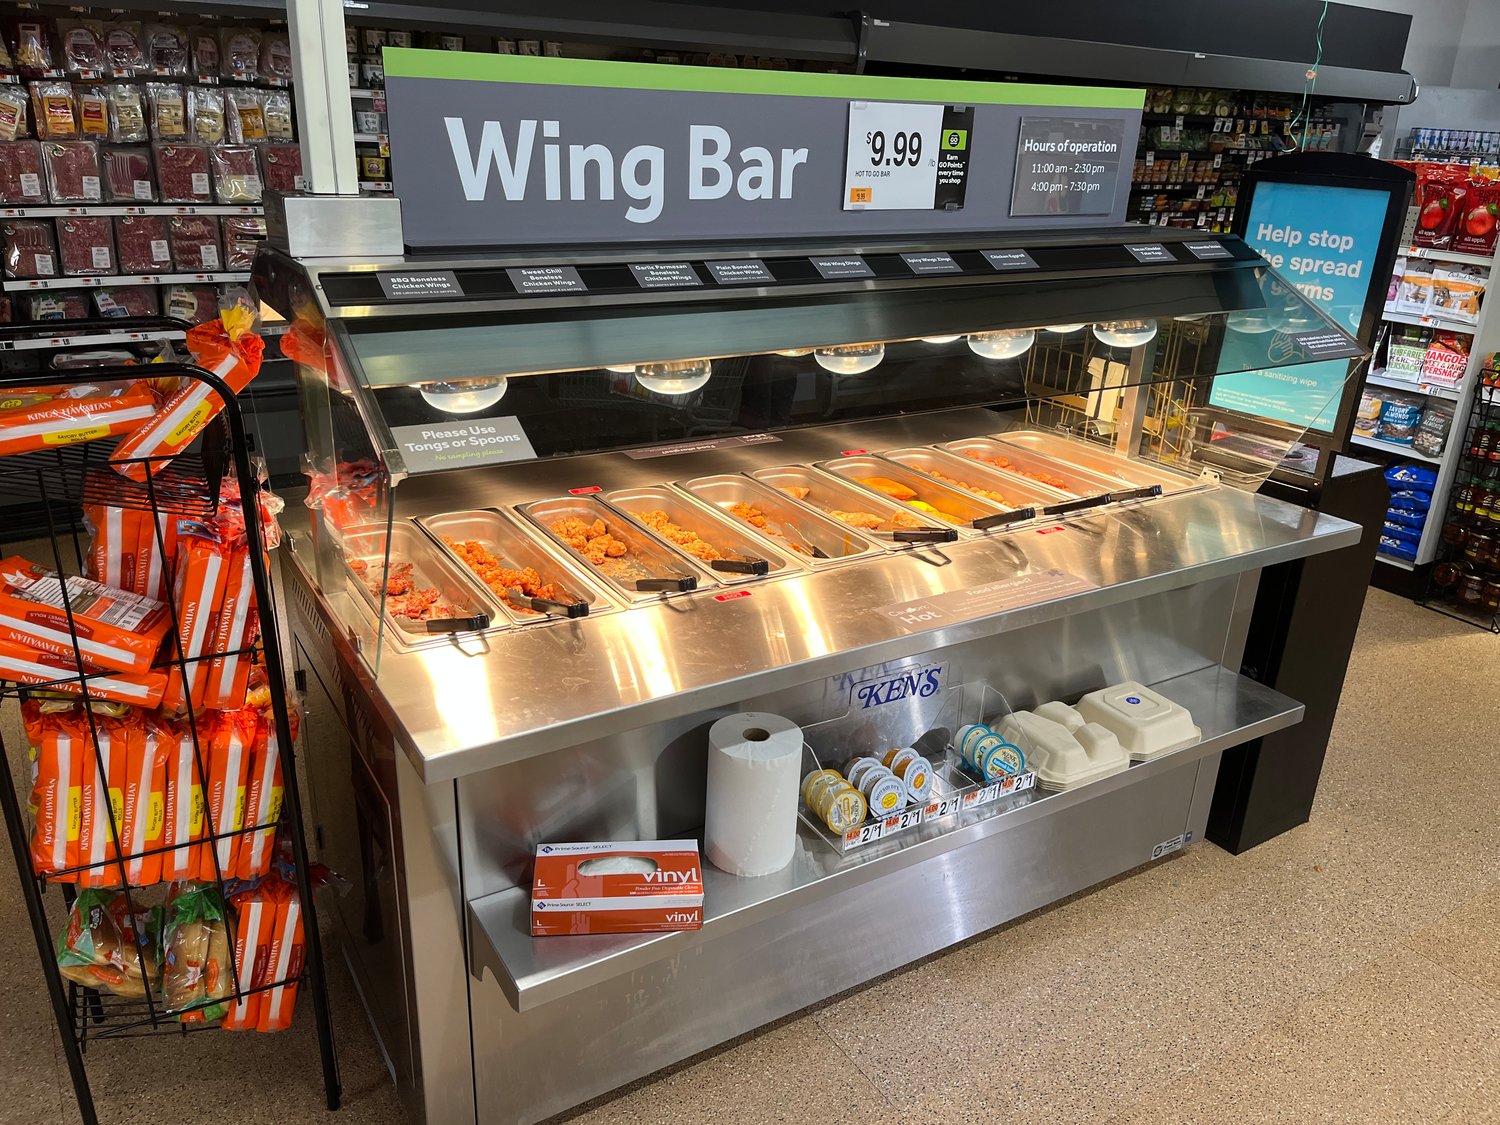 The new wings bar gives shoppers the option to grab a hot snack if they are on the go.